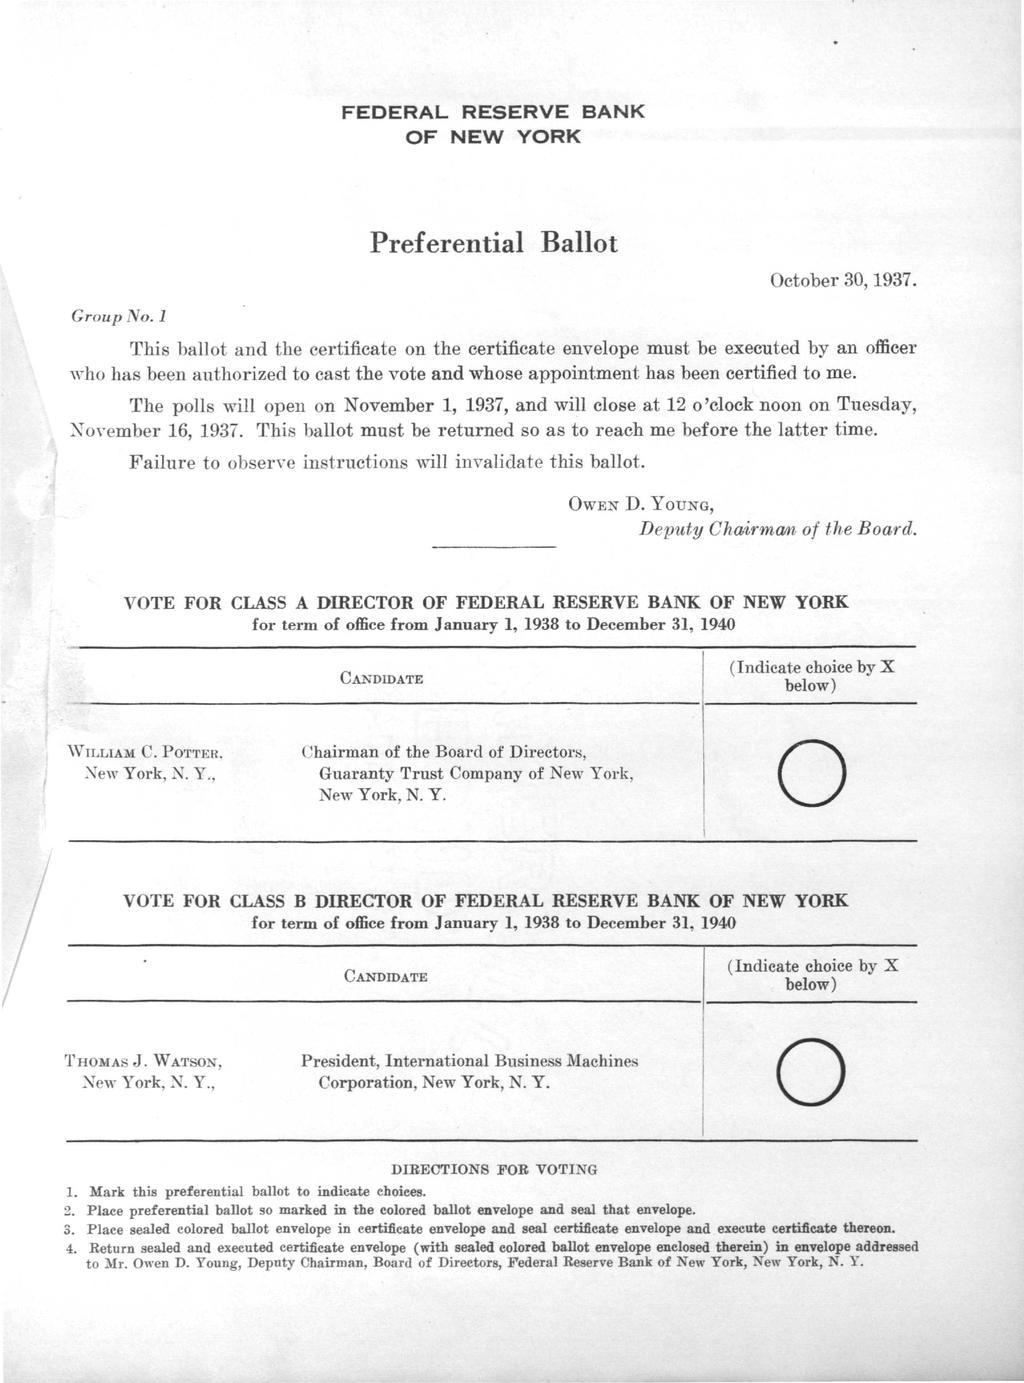 FEDERAL RESERVE BANK OF NEW YORK Group No. 1 Preferential Ballot October 30,1937.